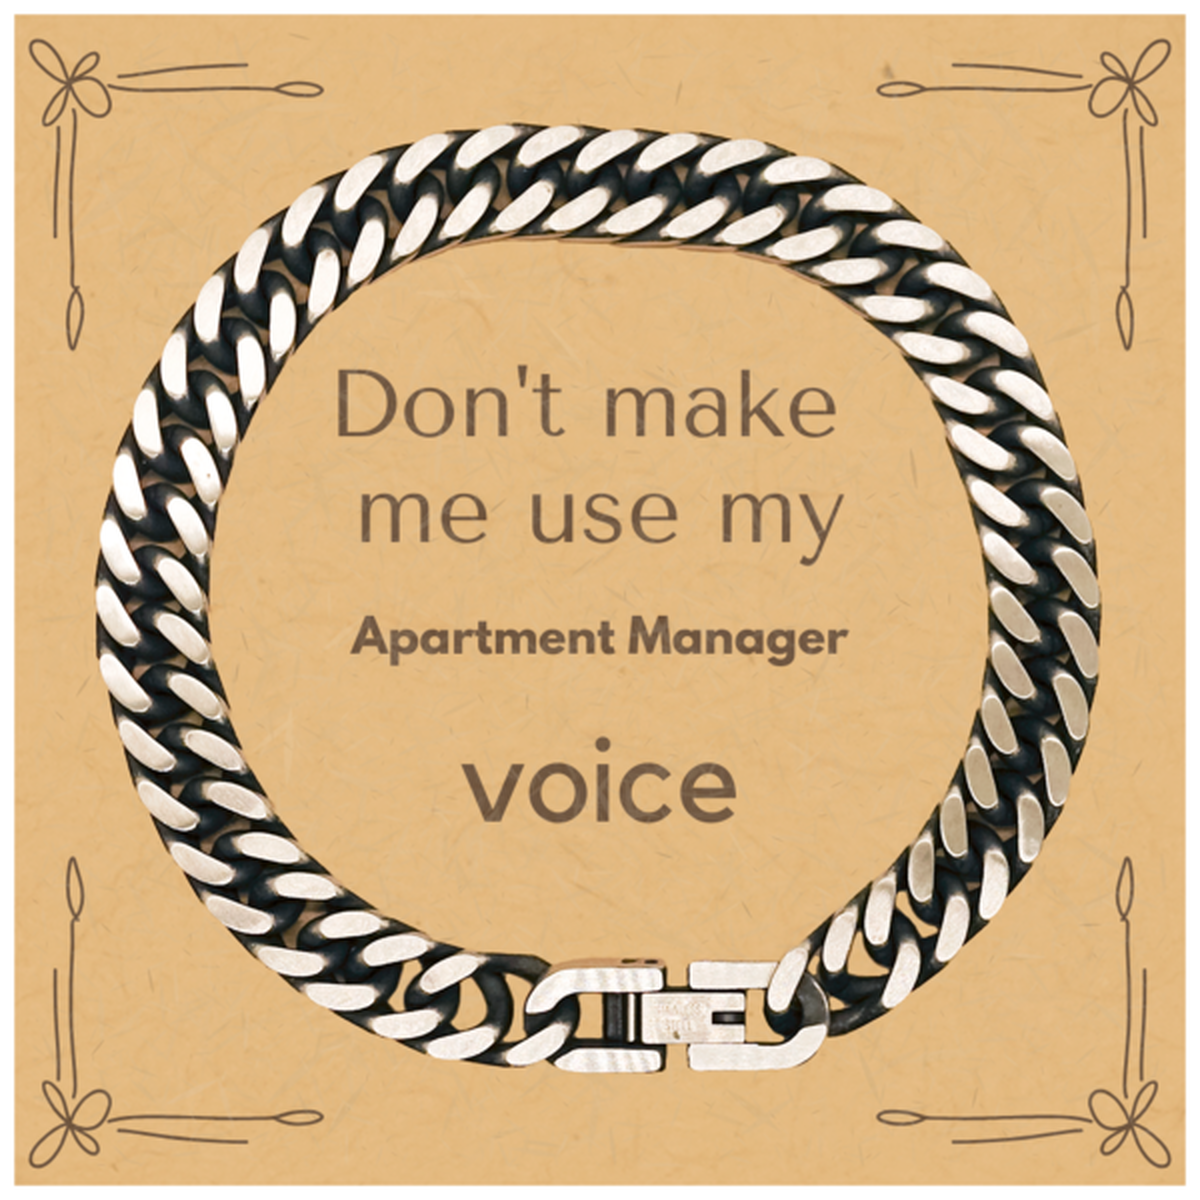 Don't make me use my Apartment Manager voice, Sarcasm Apartment Manager Card Gifts, Christmas Apartment Manager Cuban Link Chain Bracelet Birthday Unique Gifts For Apartment Manager Coworkers, Men, Women, Colleague, Friends